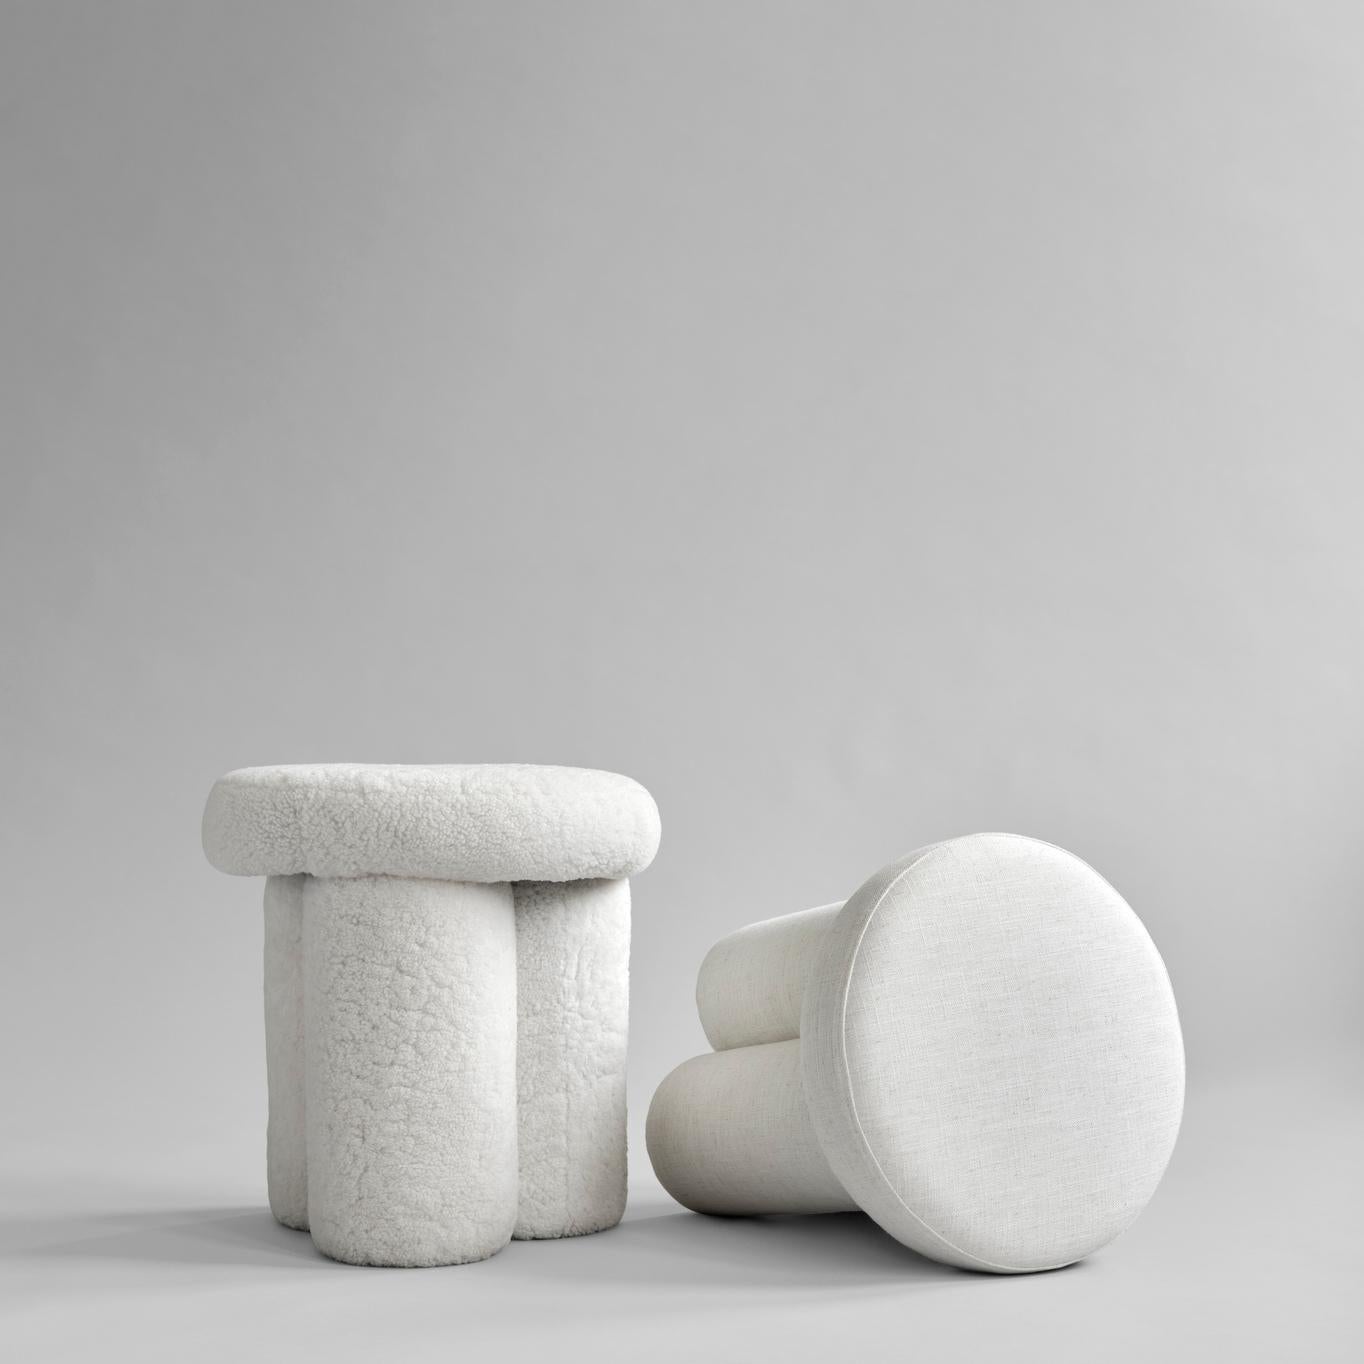 Linen big foot stool by 101 Copenhagen.
Designed by Kristian Sofus Hansen & Tommy Hyldahl.
Dimensions: L38 / W38 /H43 cm.
Materials: linen

A quirky and contemporary addition to any interior setting and family alike, the Big Foot Stool is